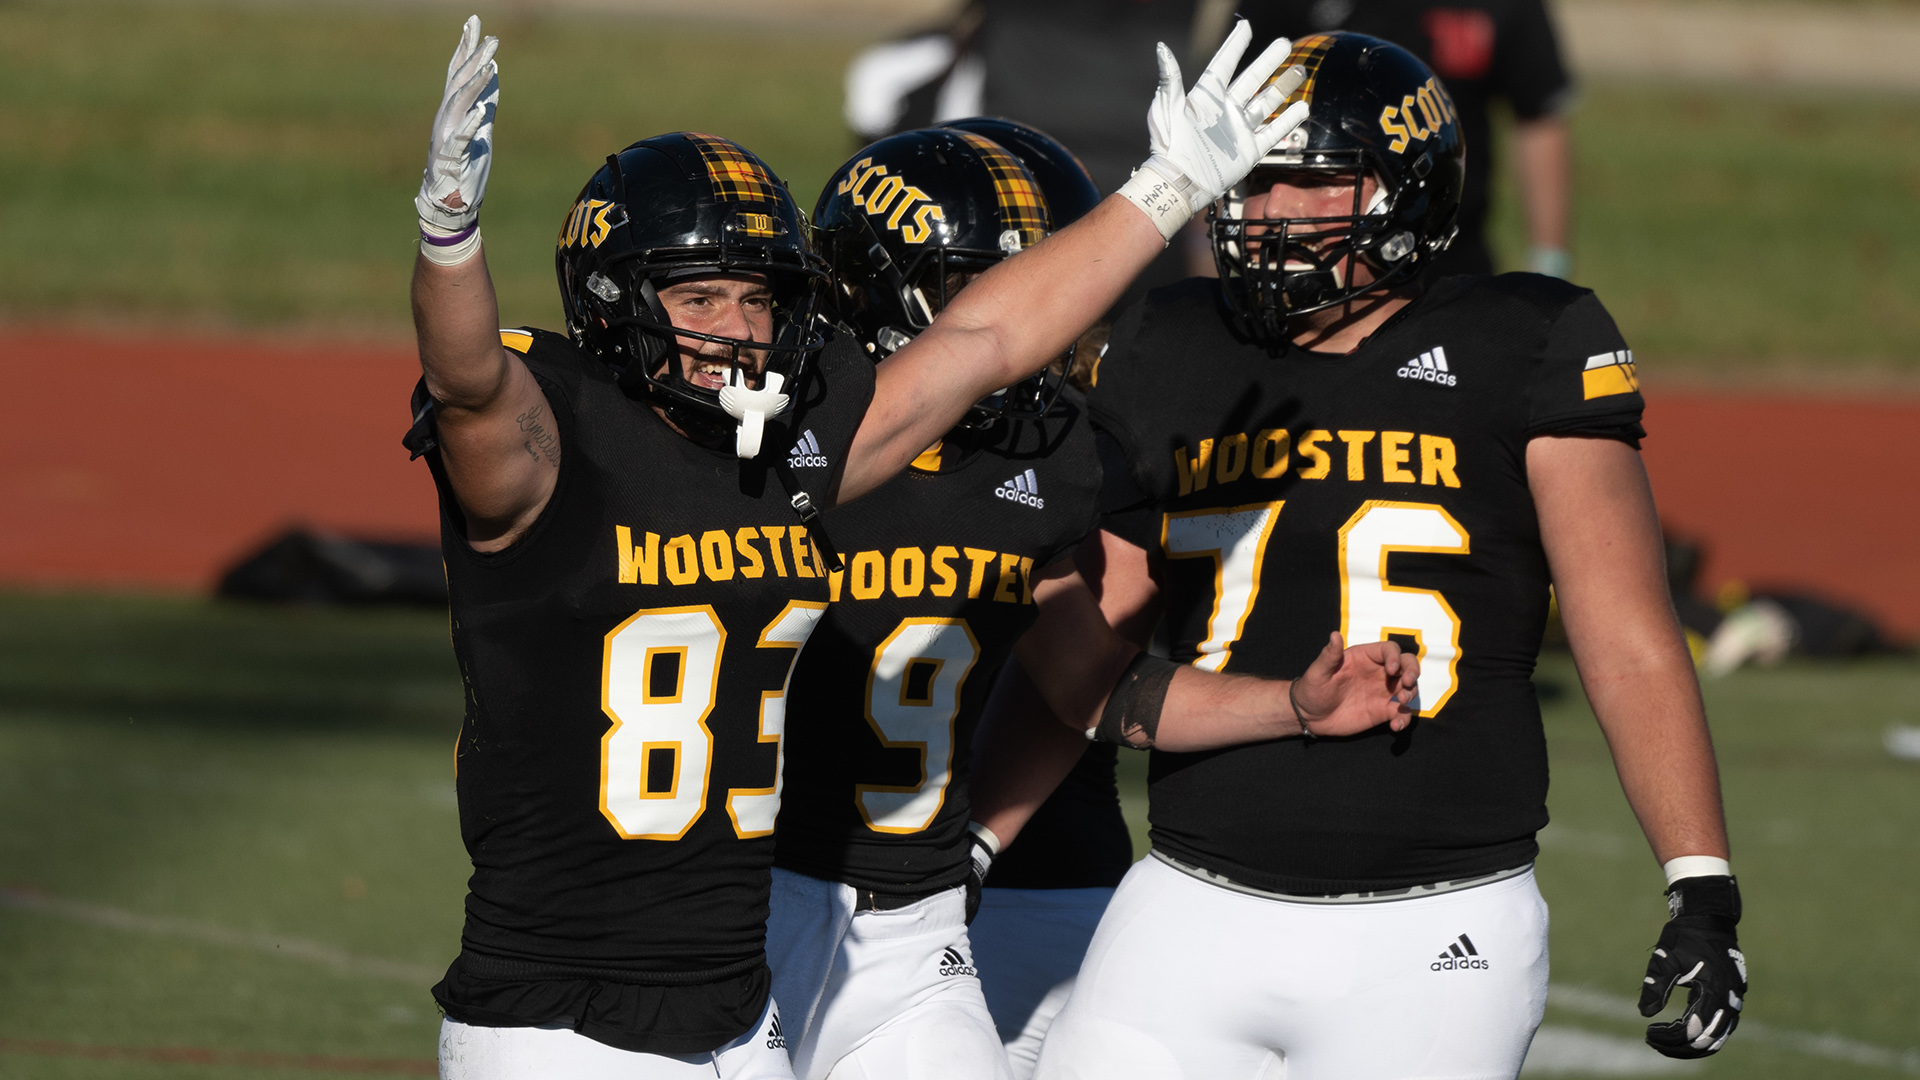 Cole Hissong, Wooster football